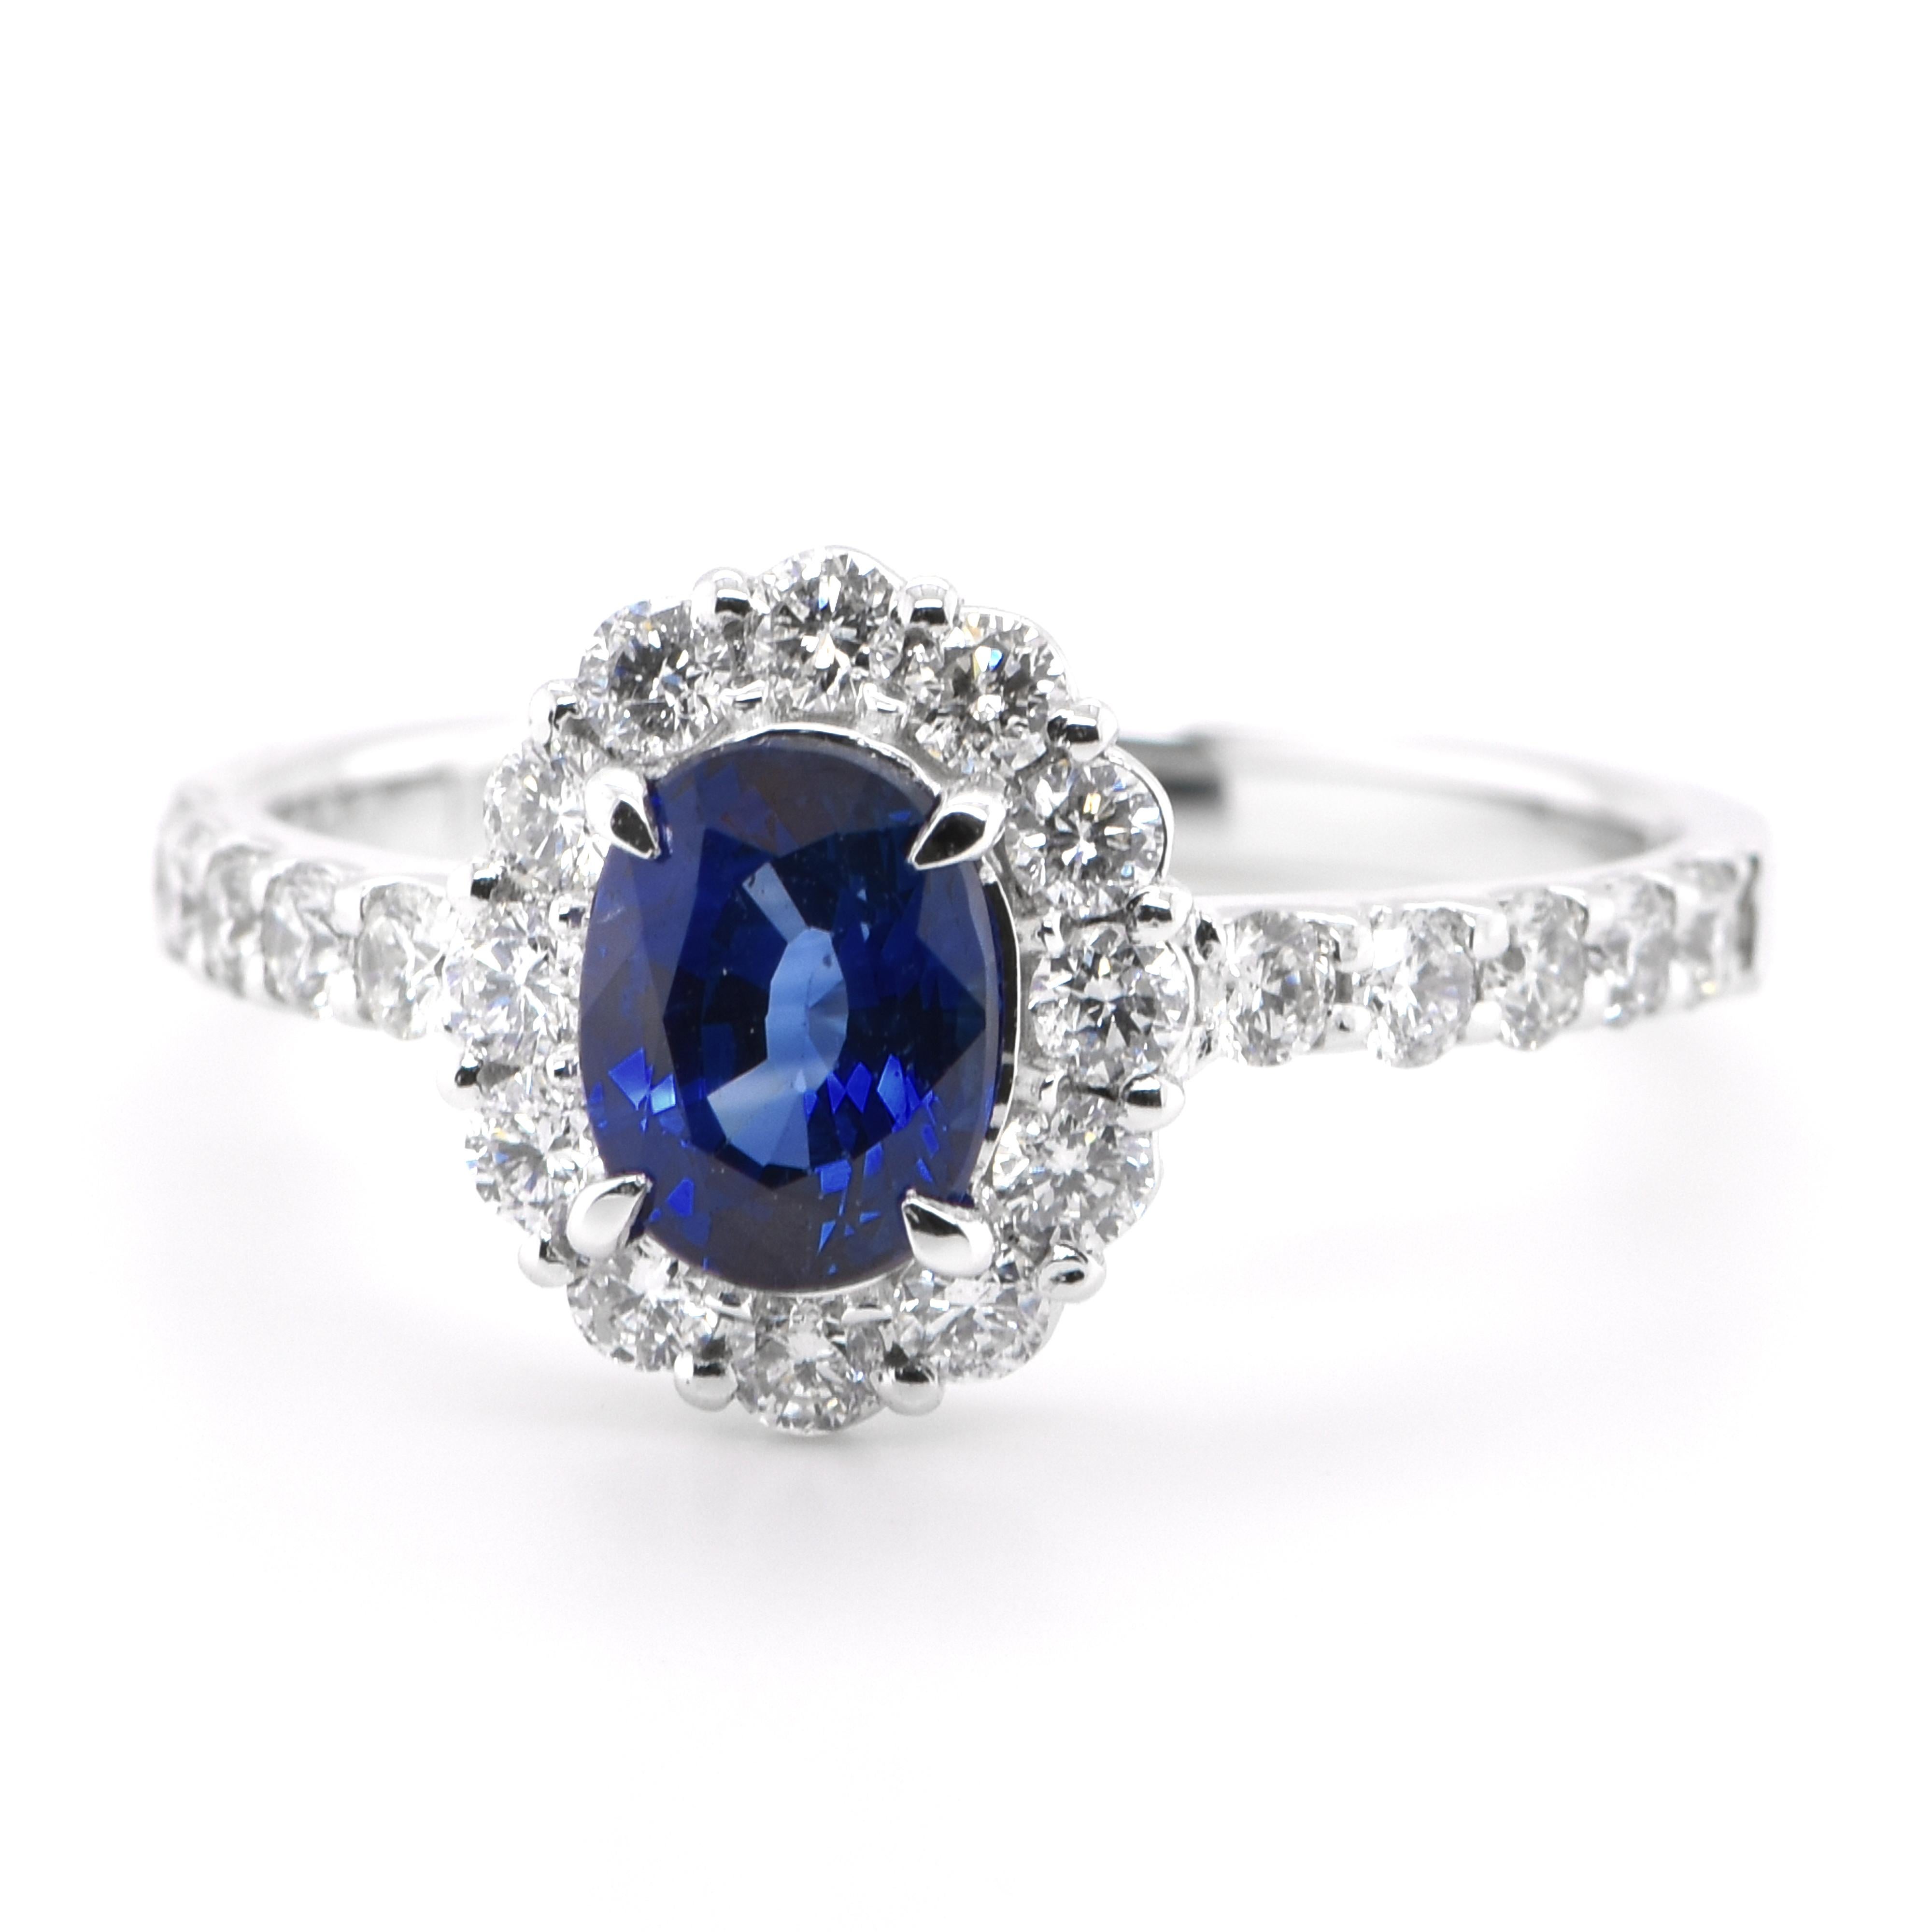 A beautiful Engagement Ring featuring a 1.00 Carat Natural Sapphire and 0.56 Carats Diamond Accents set in Platinum. Sapphires have extraordinary durability - they excel in hardness as well as toughness and durability making them very popular in